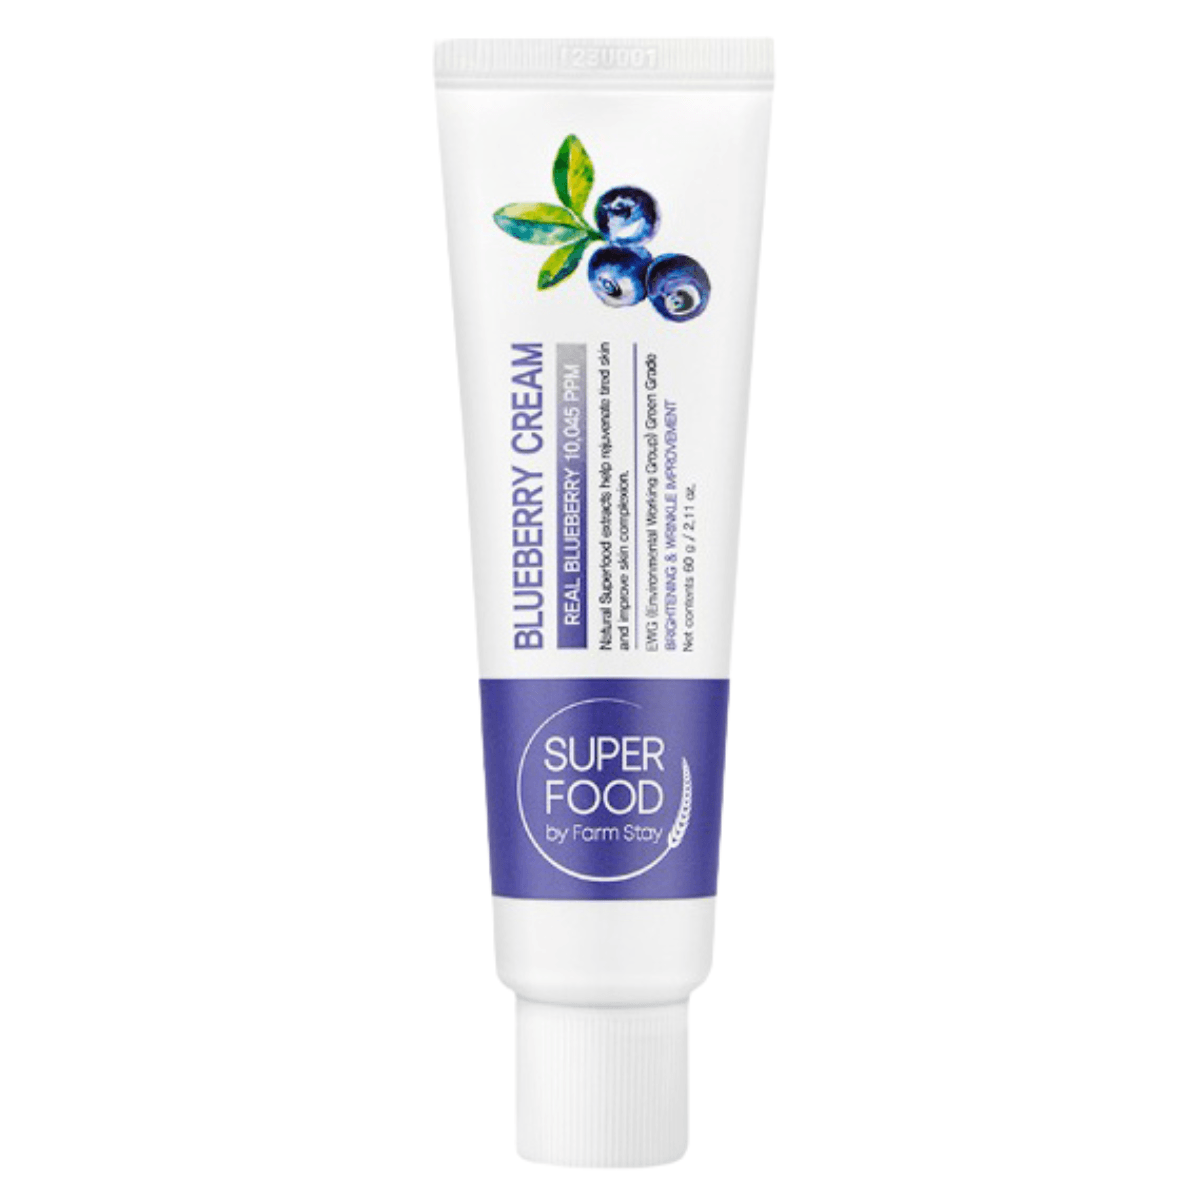 Superfood Blueberry Cream Rejuvenate tired skin, moisturize deeply, improve elasticity and reduce wrinkles for healthier skin